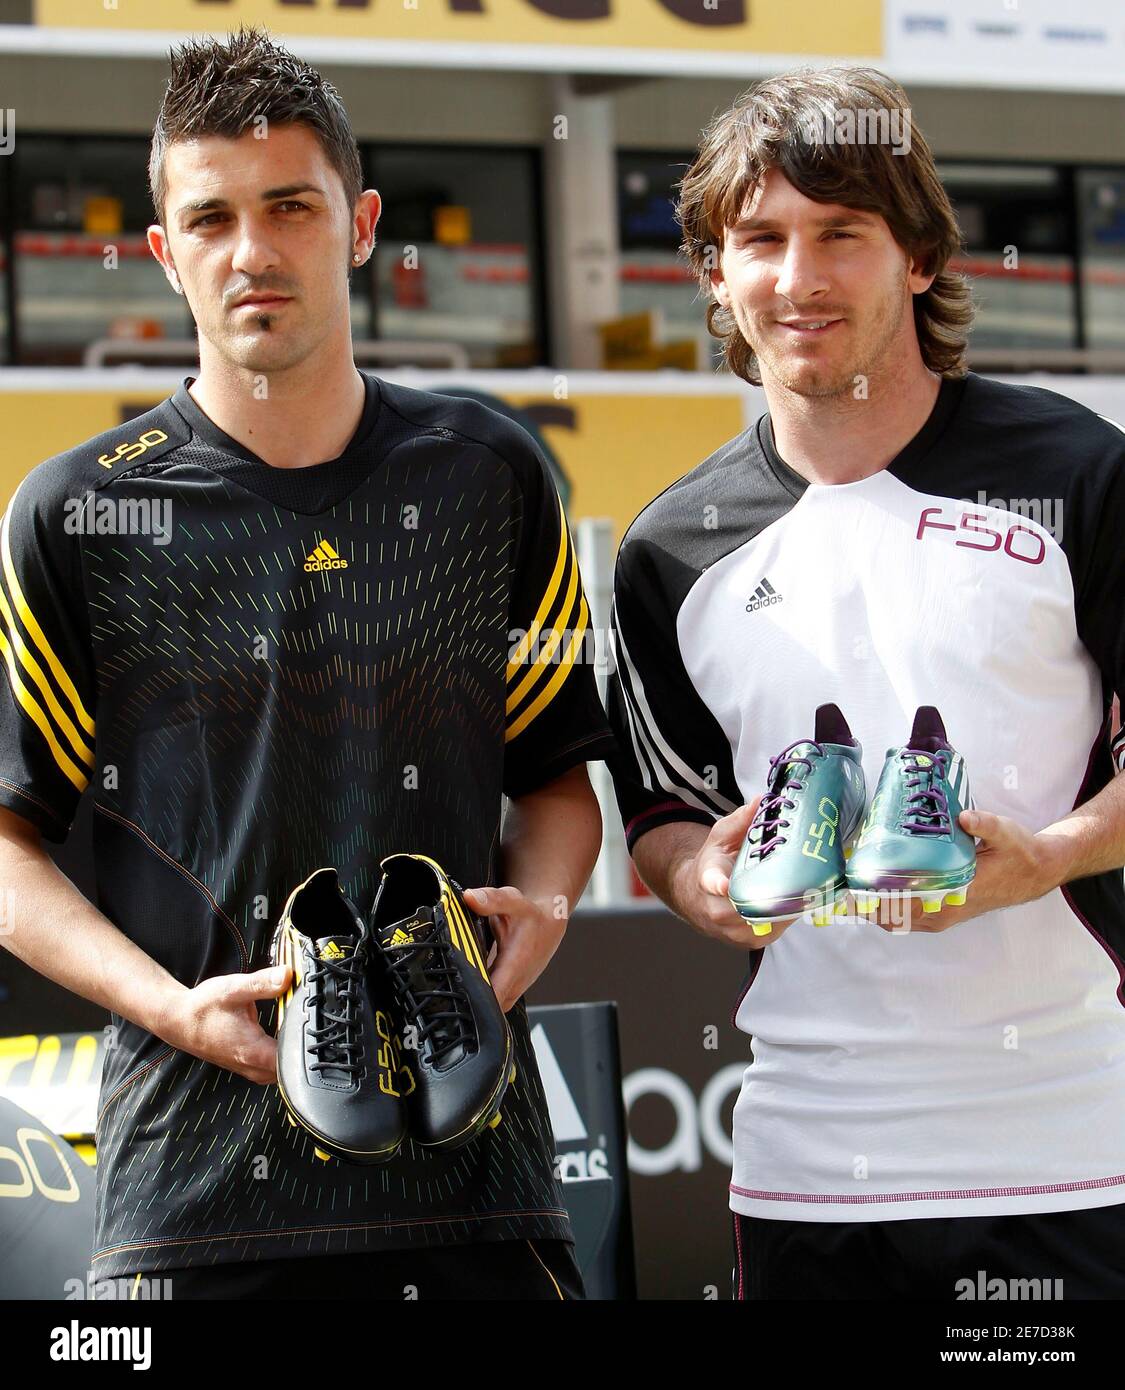 Argentina's national soccer team player Lionel Messi (R) and Spain's  national team player David Villa (L) display the new F50 adiZero soccer  boots during a promotional event at Montmelo circuit near Barcelona